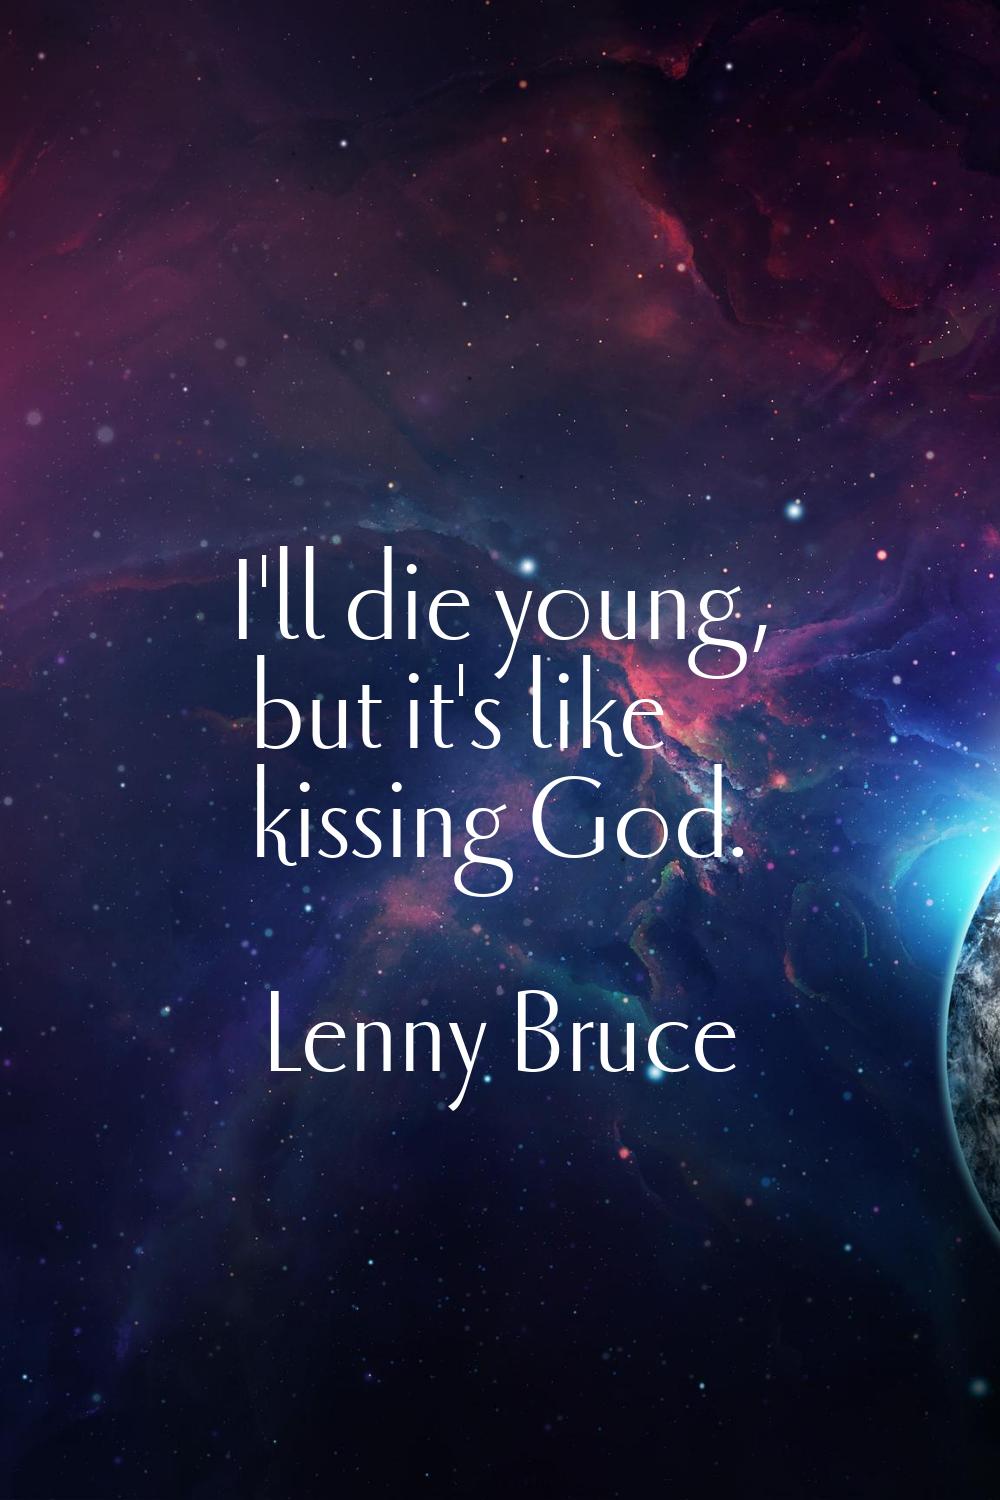 I'll die young, but it's like kissing God.